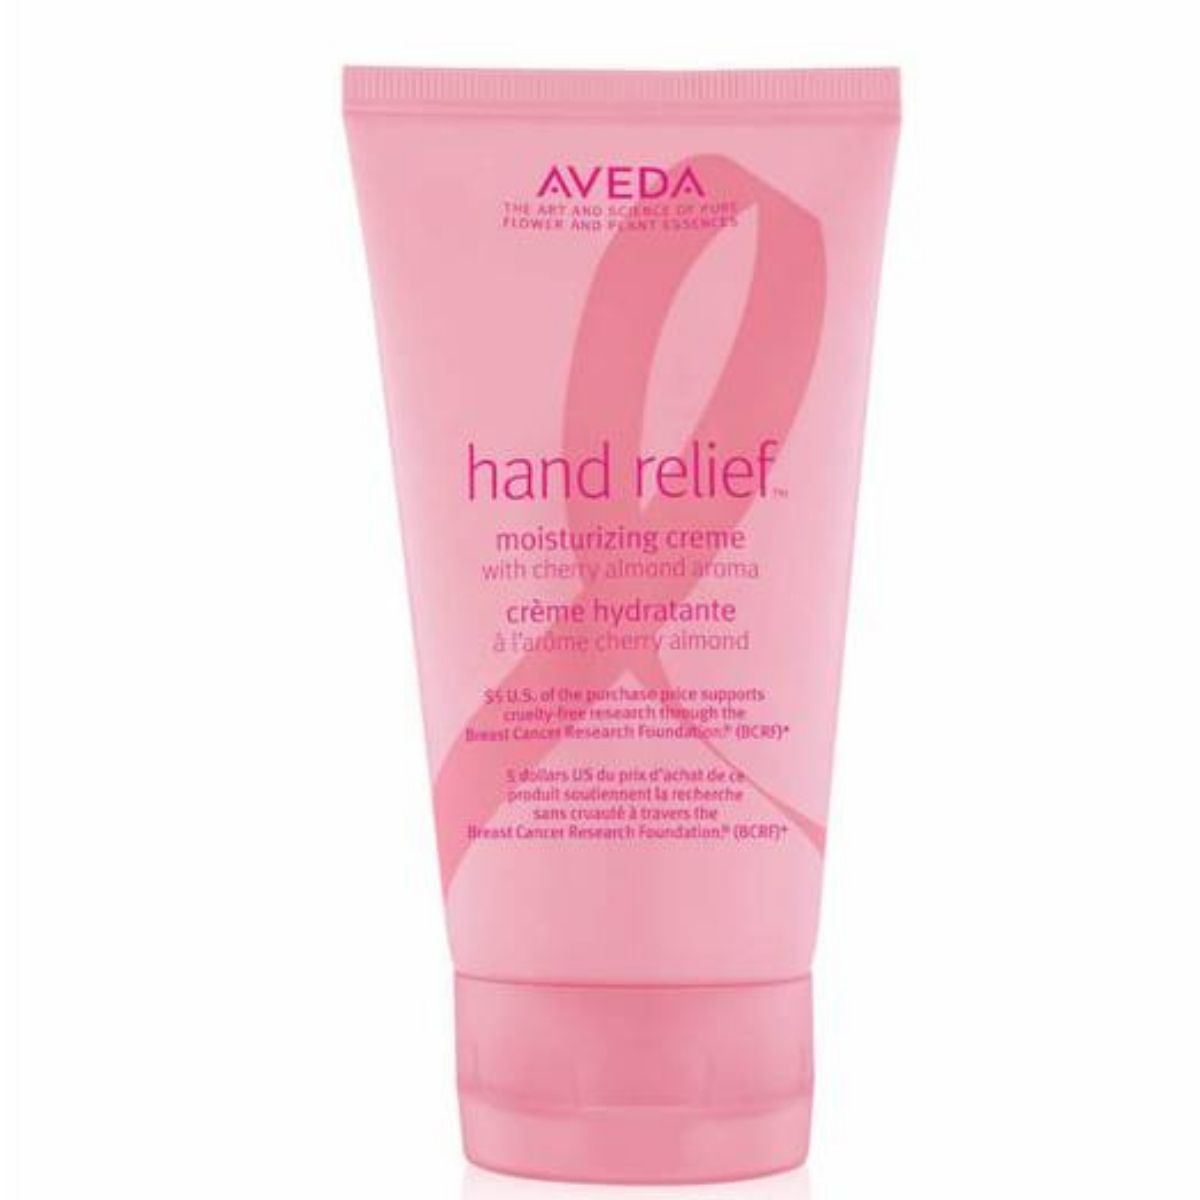 Aveda Limited Edition BCA Hand Relief. 40% OFF